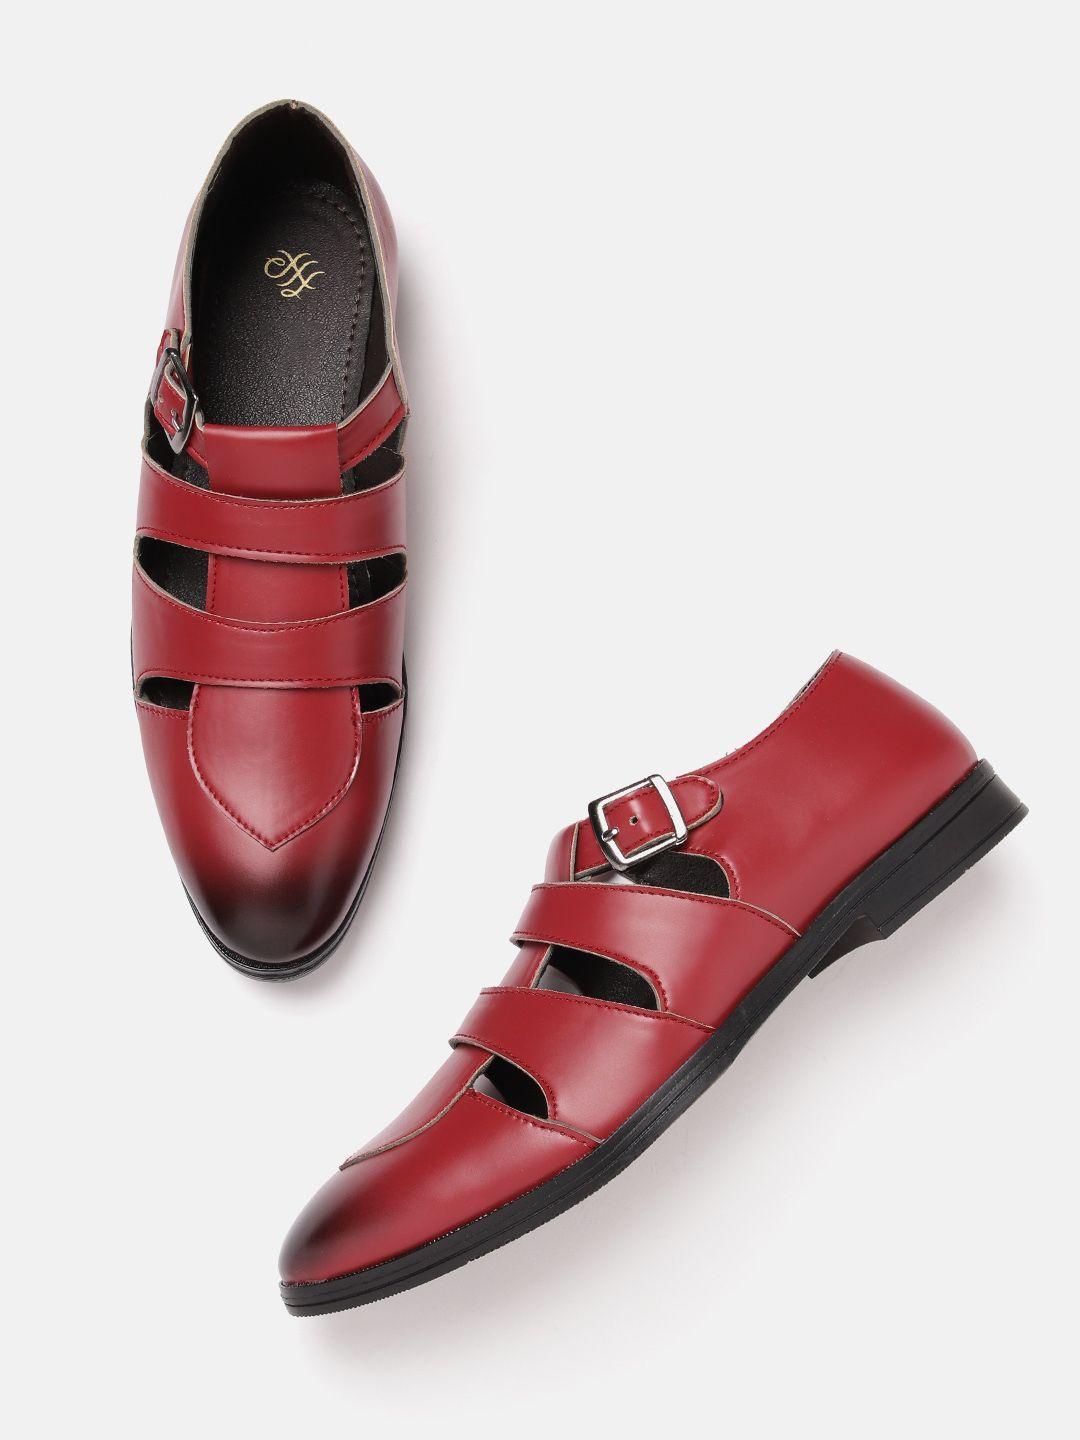 house of pataudi men handcrafted shoe-style sandals